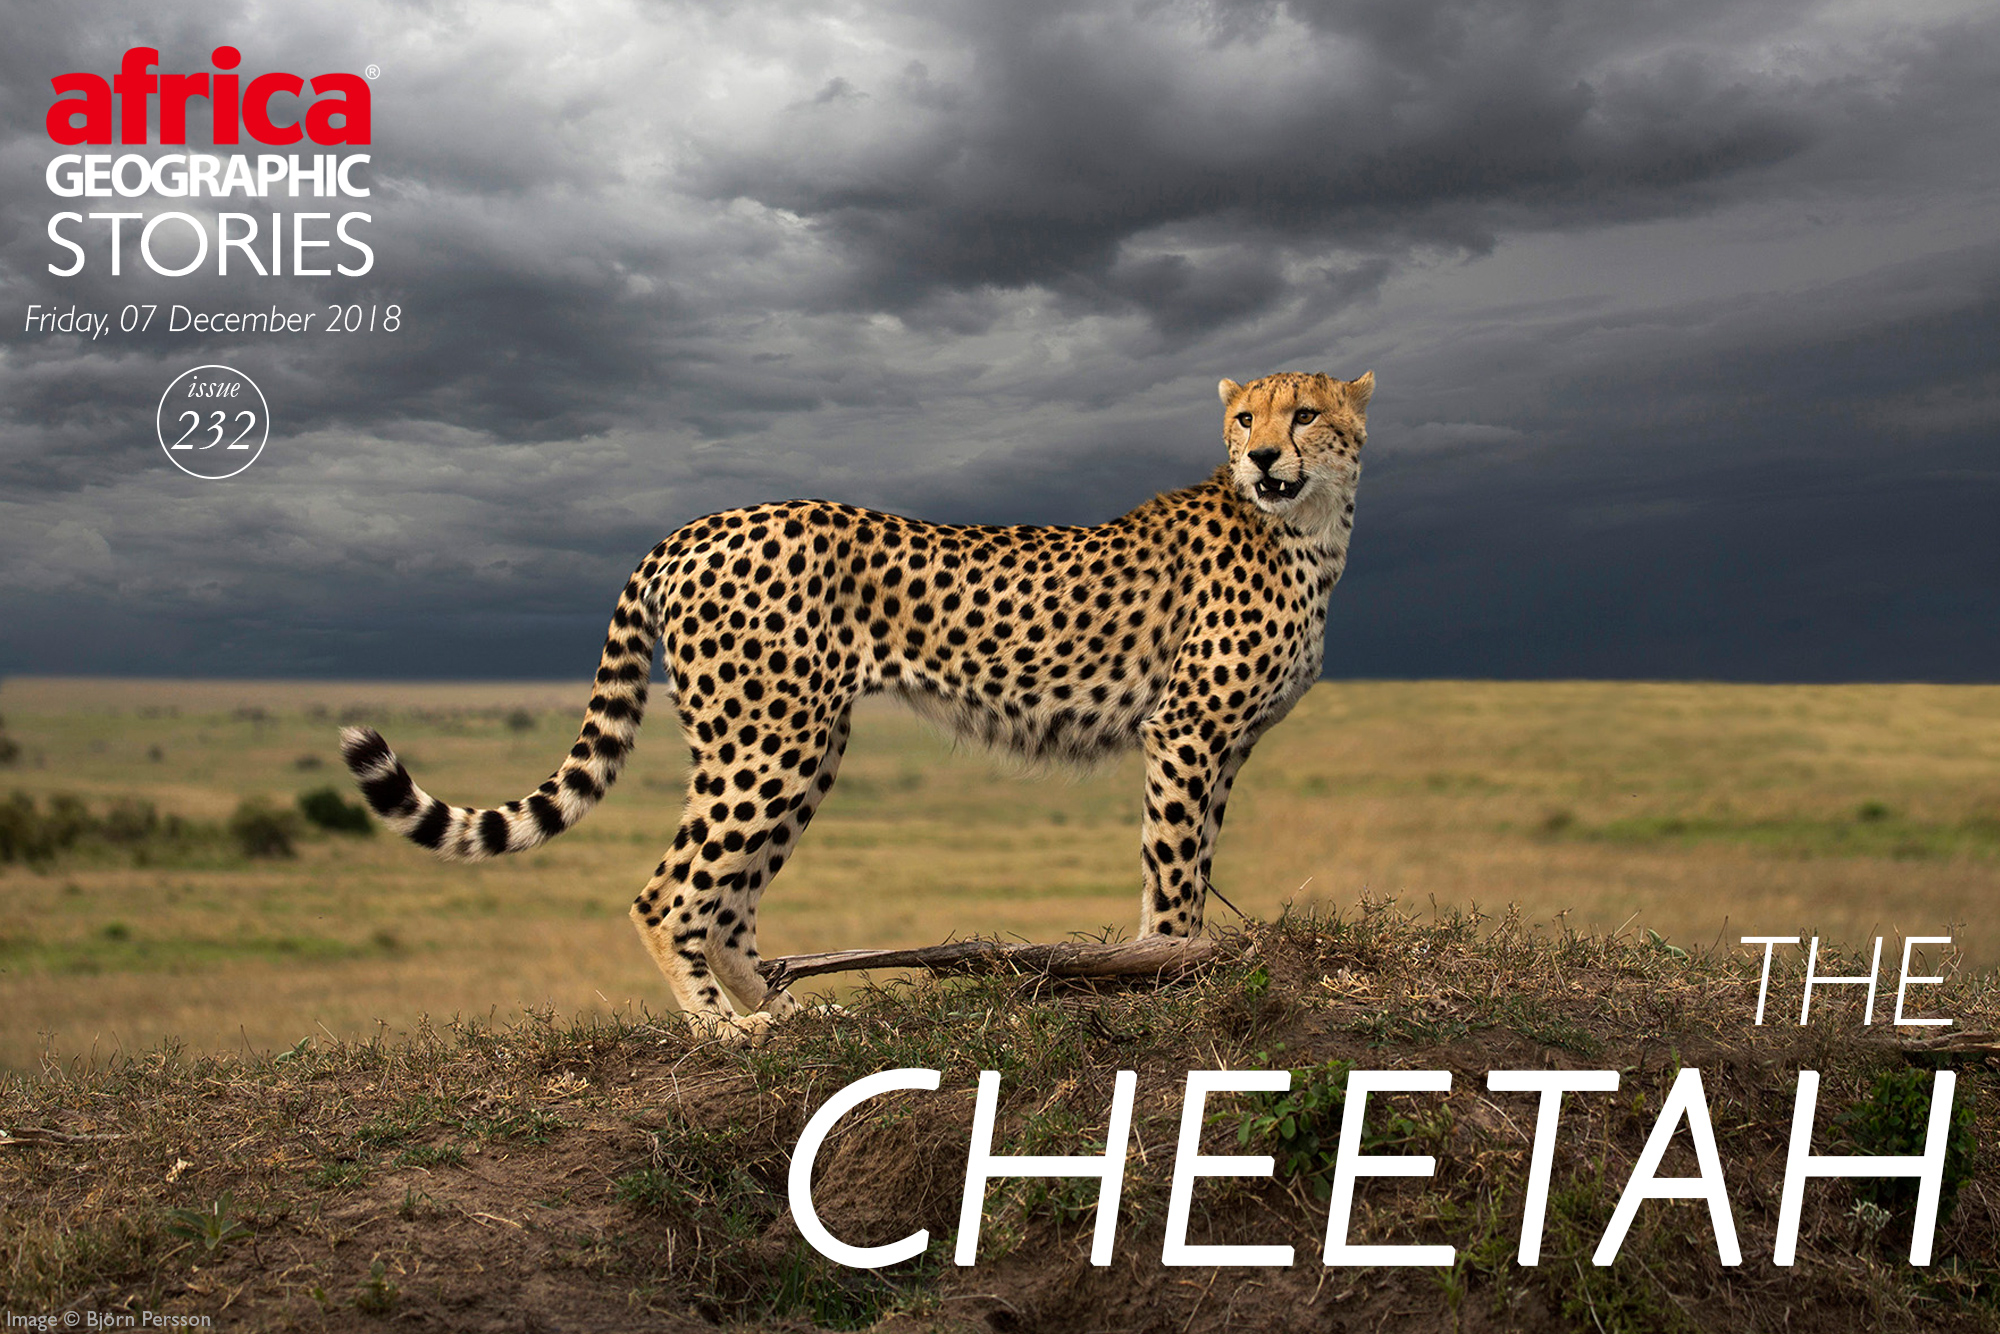 The Cheetah - Africa Geographic